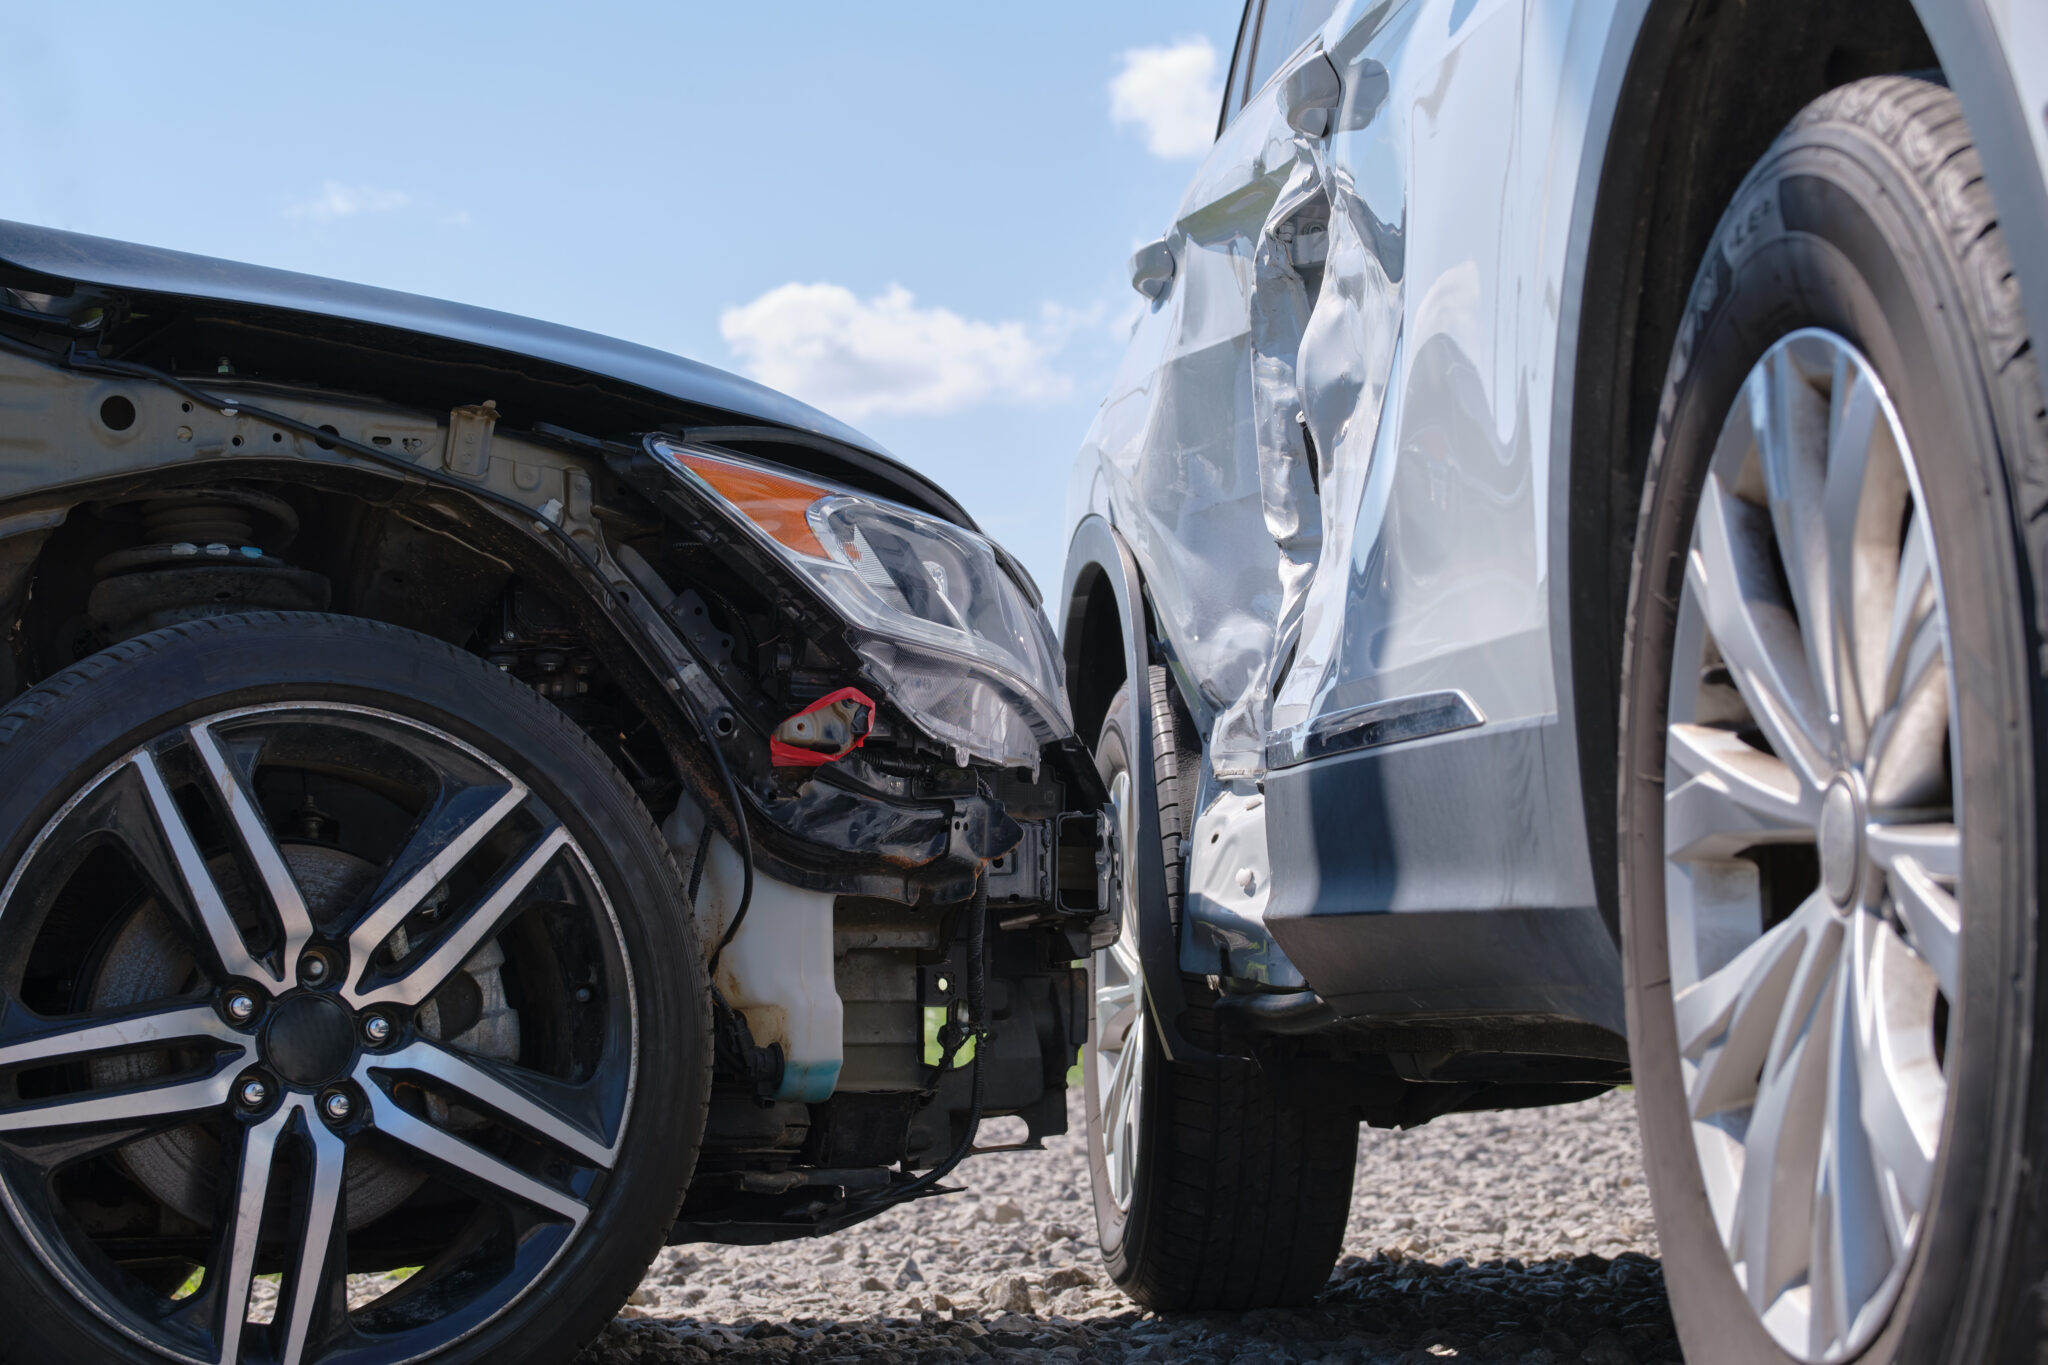 value of your car after an accident